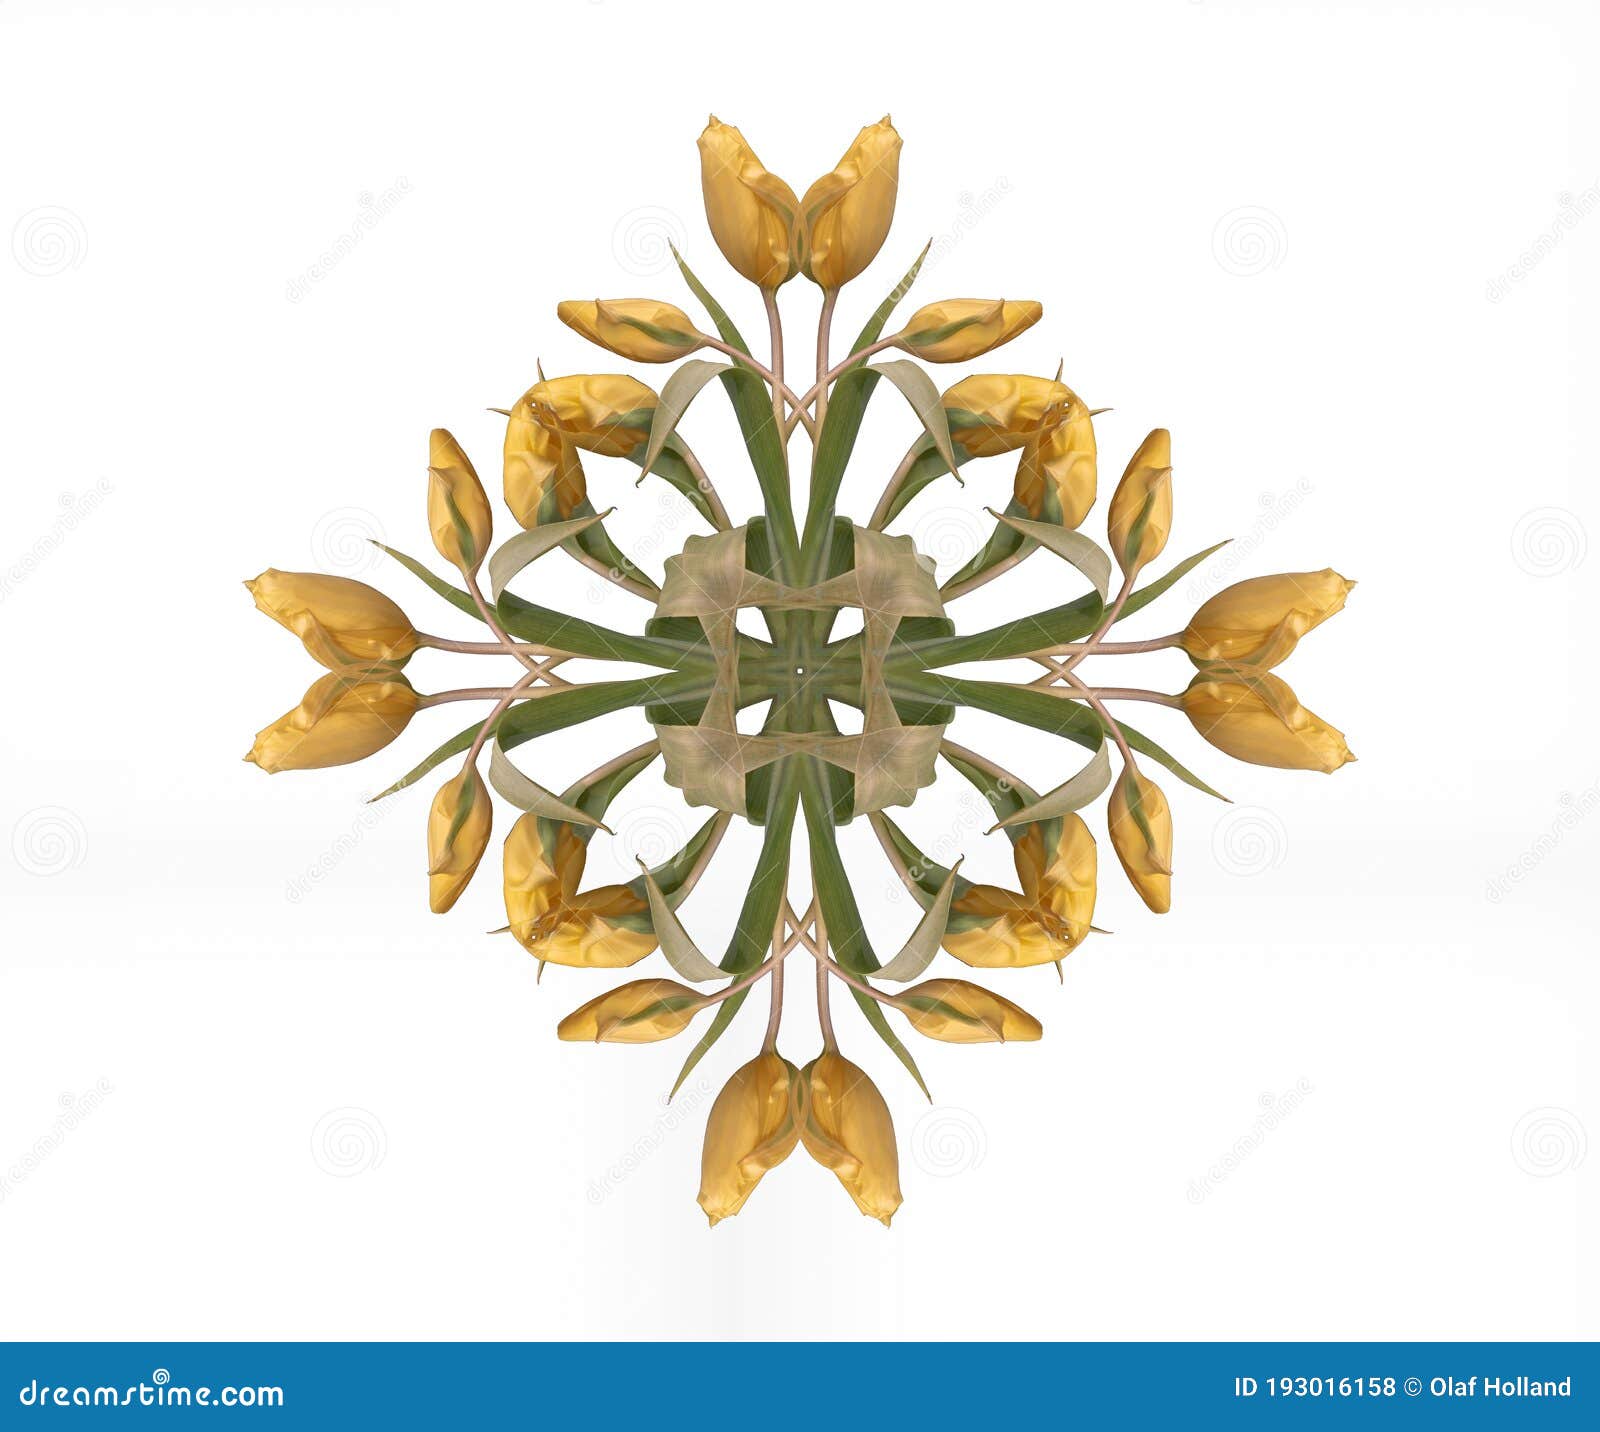 symmetrical pattern made from macros of yellow green tulips on white background